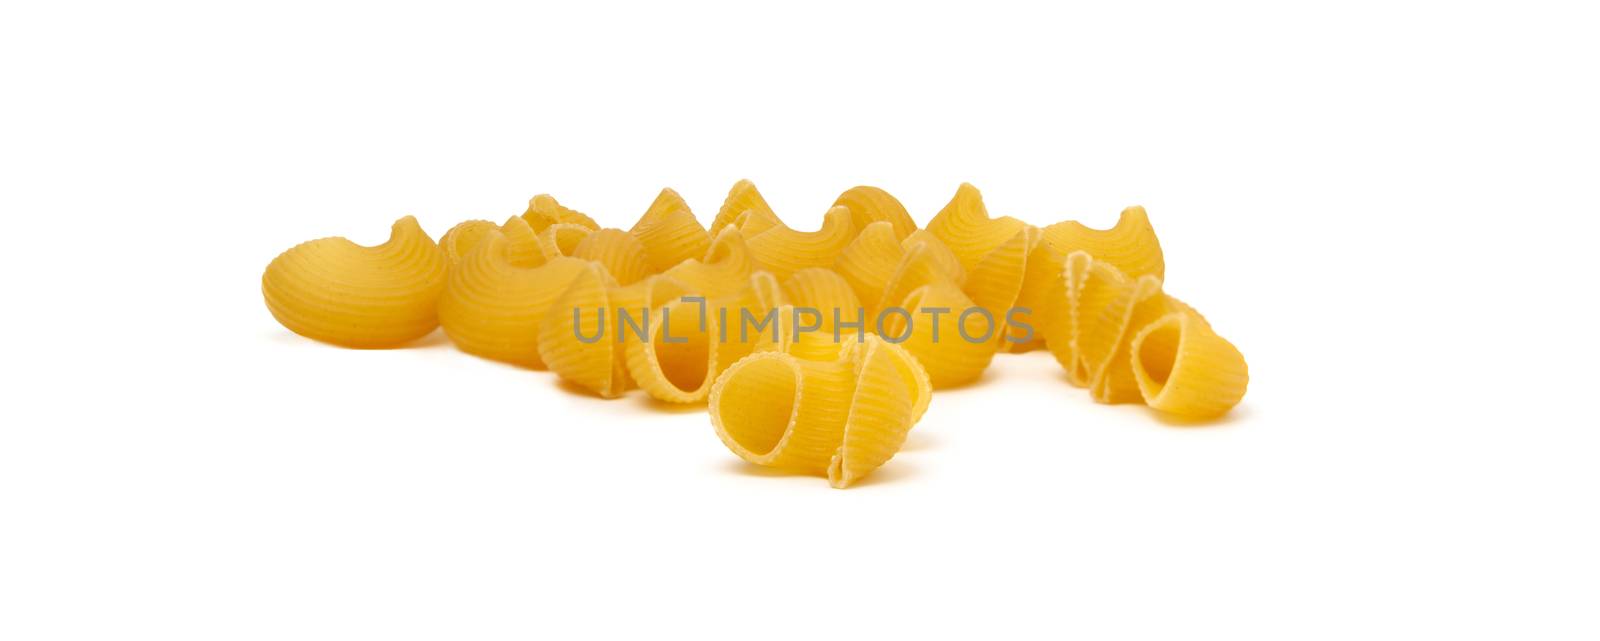 Pipe rigate pasta isolated on white background by SlayCer